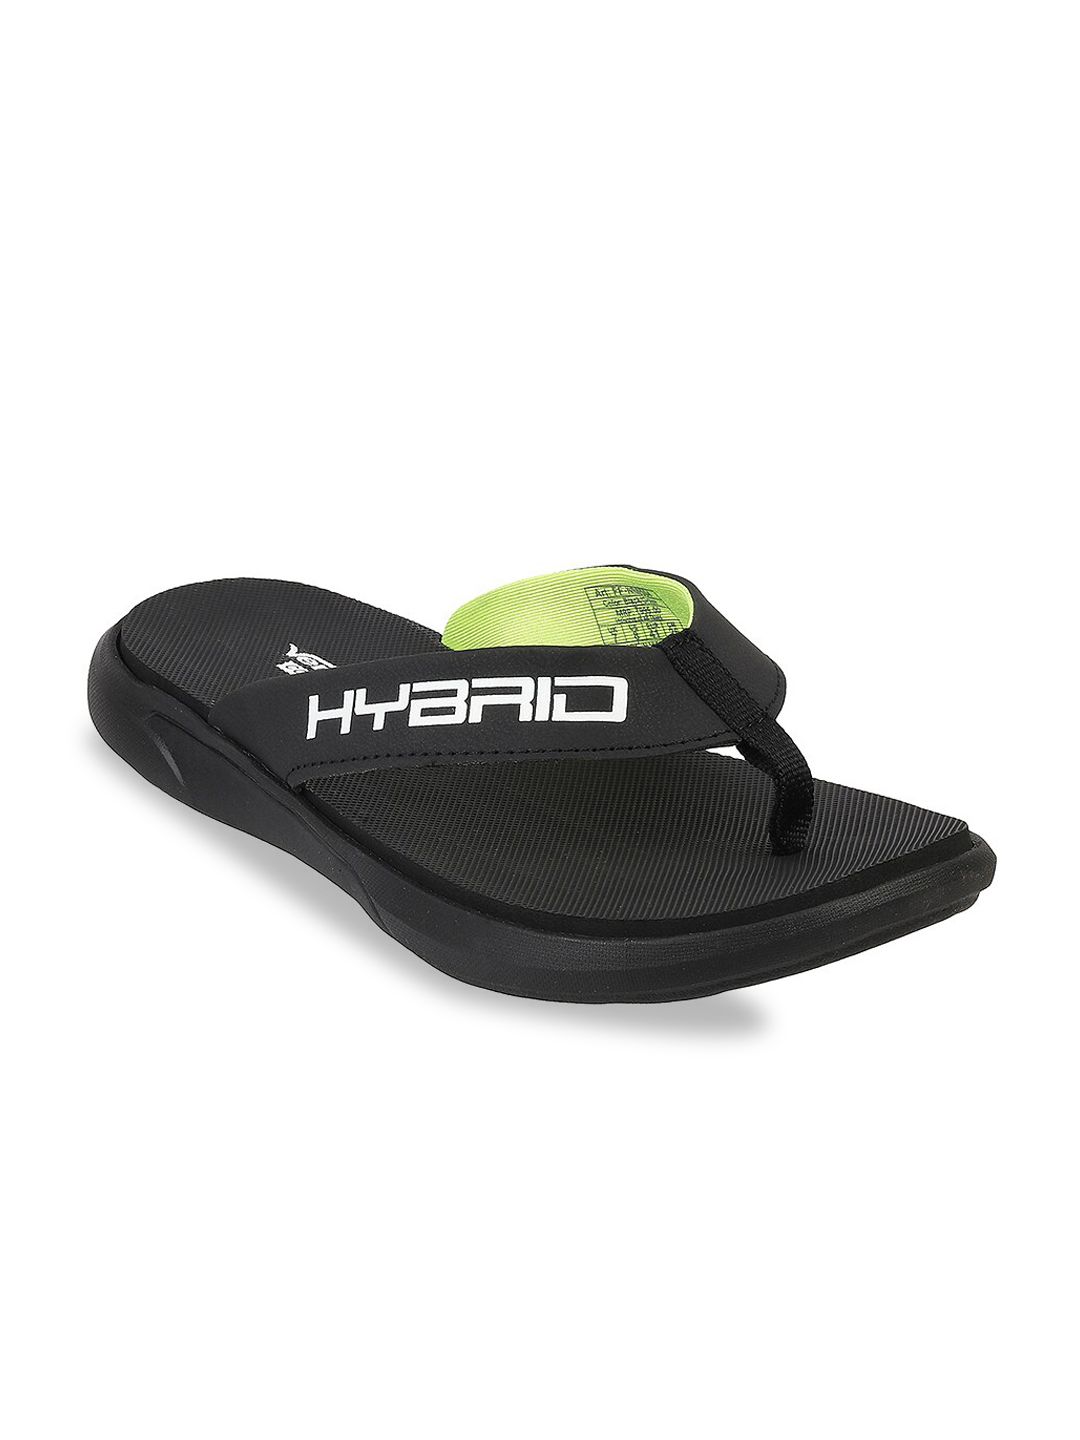 Vento Unisex Black & Green Printed Rubber Thong Flip-Flops Price in India